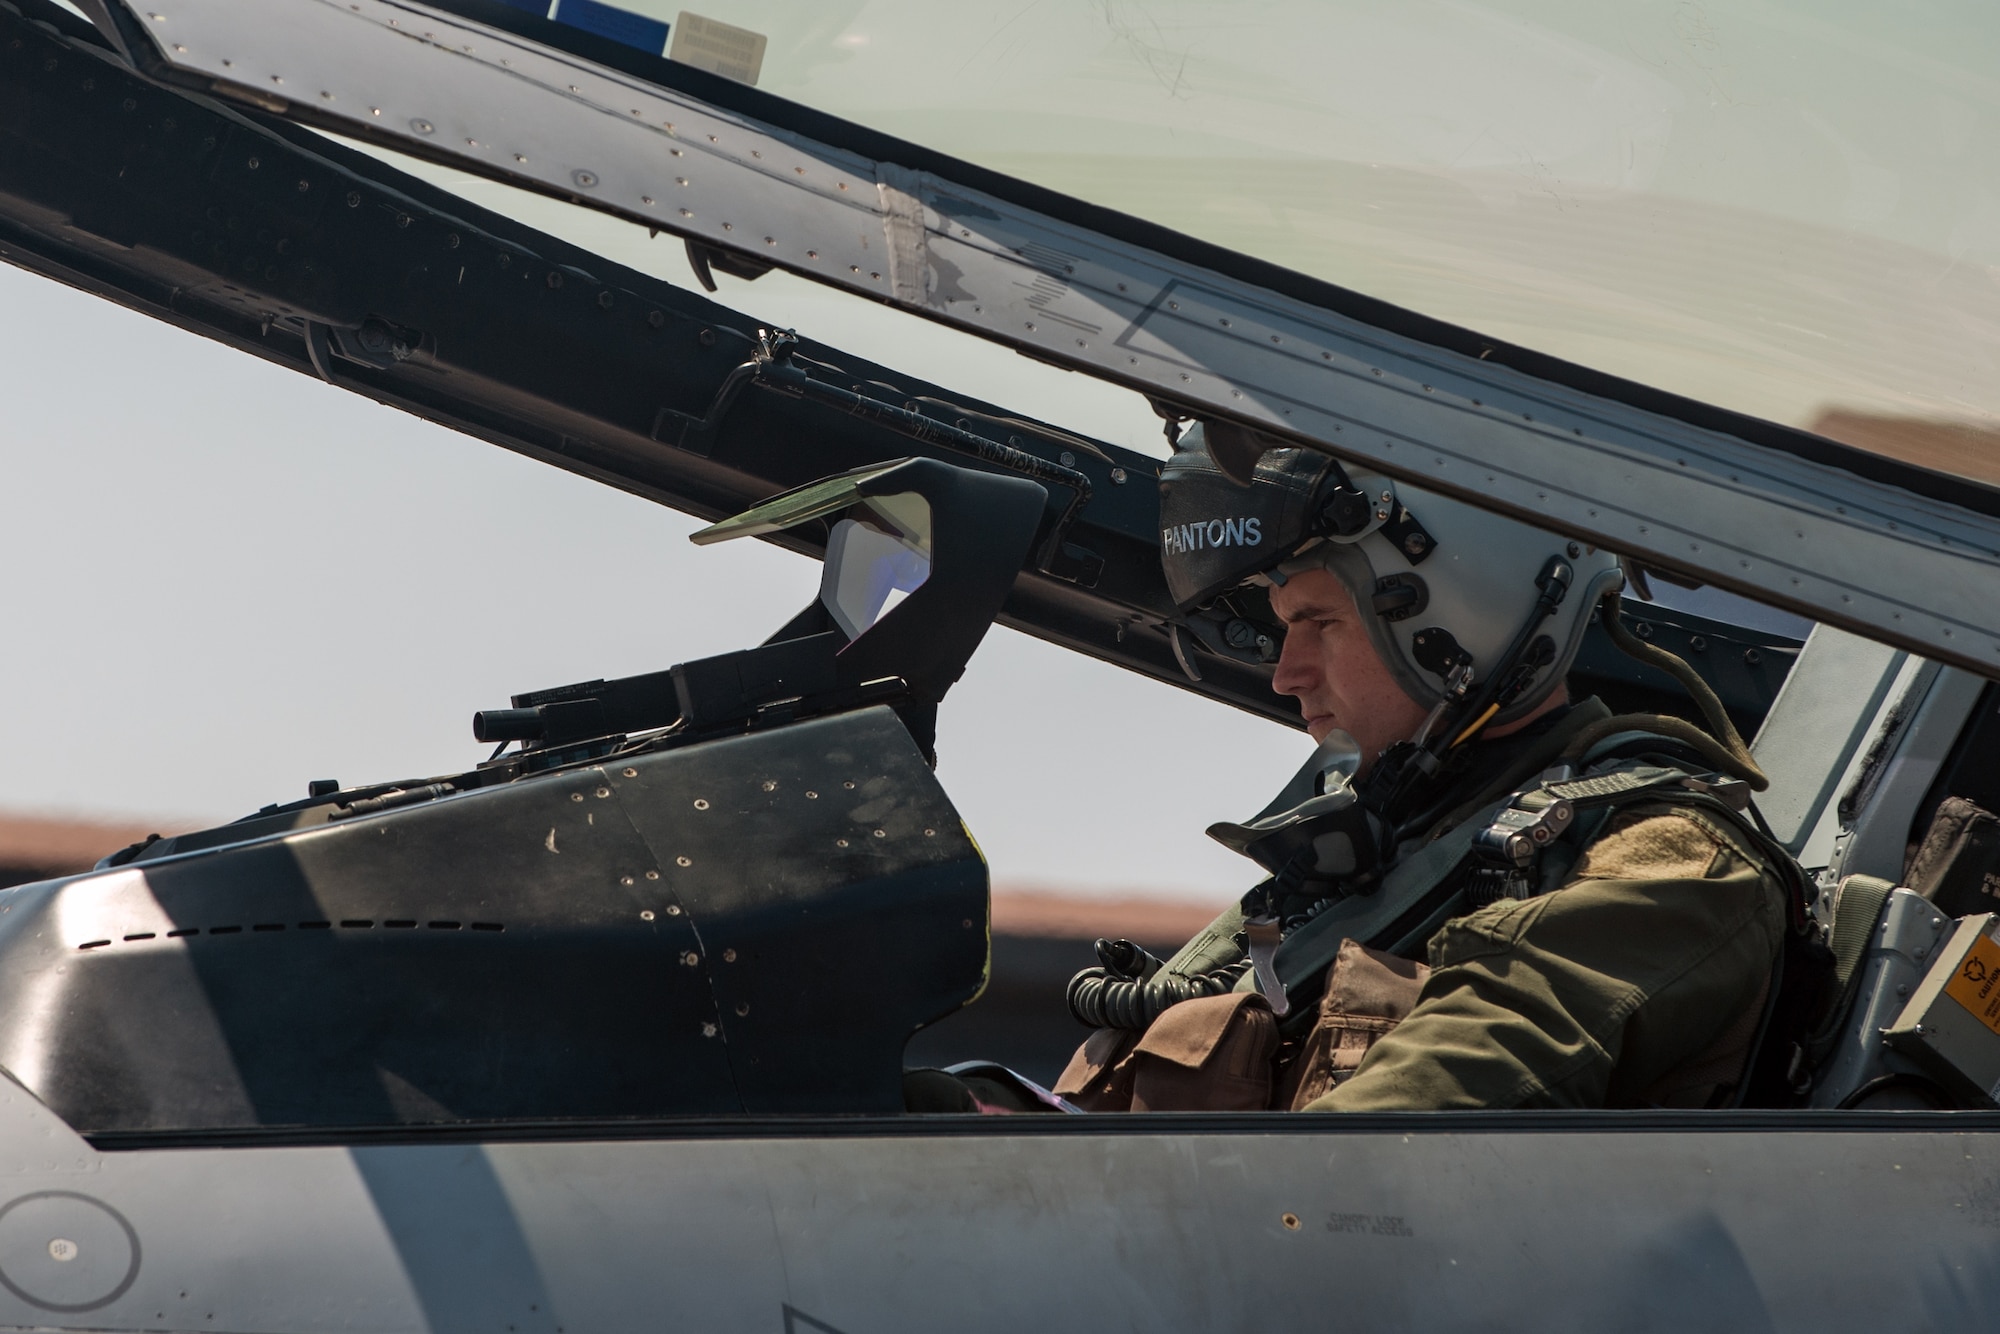 U.S. Air Force Capt. Jacob “Apollo” Allen, 35th Fighter Squadron F-16 Fighting Falcon pilot, prepares to take off during exercise Max Thunder 15-1 at Gwangju Air Base, Republic of Korea, April 21, 2015. Max Thunder is a large-scale employment exercise designed to increase interoperability between U.S. and ROK forces, and ultimately enhance commitments to maintain peace in the region. (U.S. Air Force photo by Senior Airman Taylor Curry/Released)